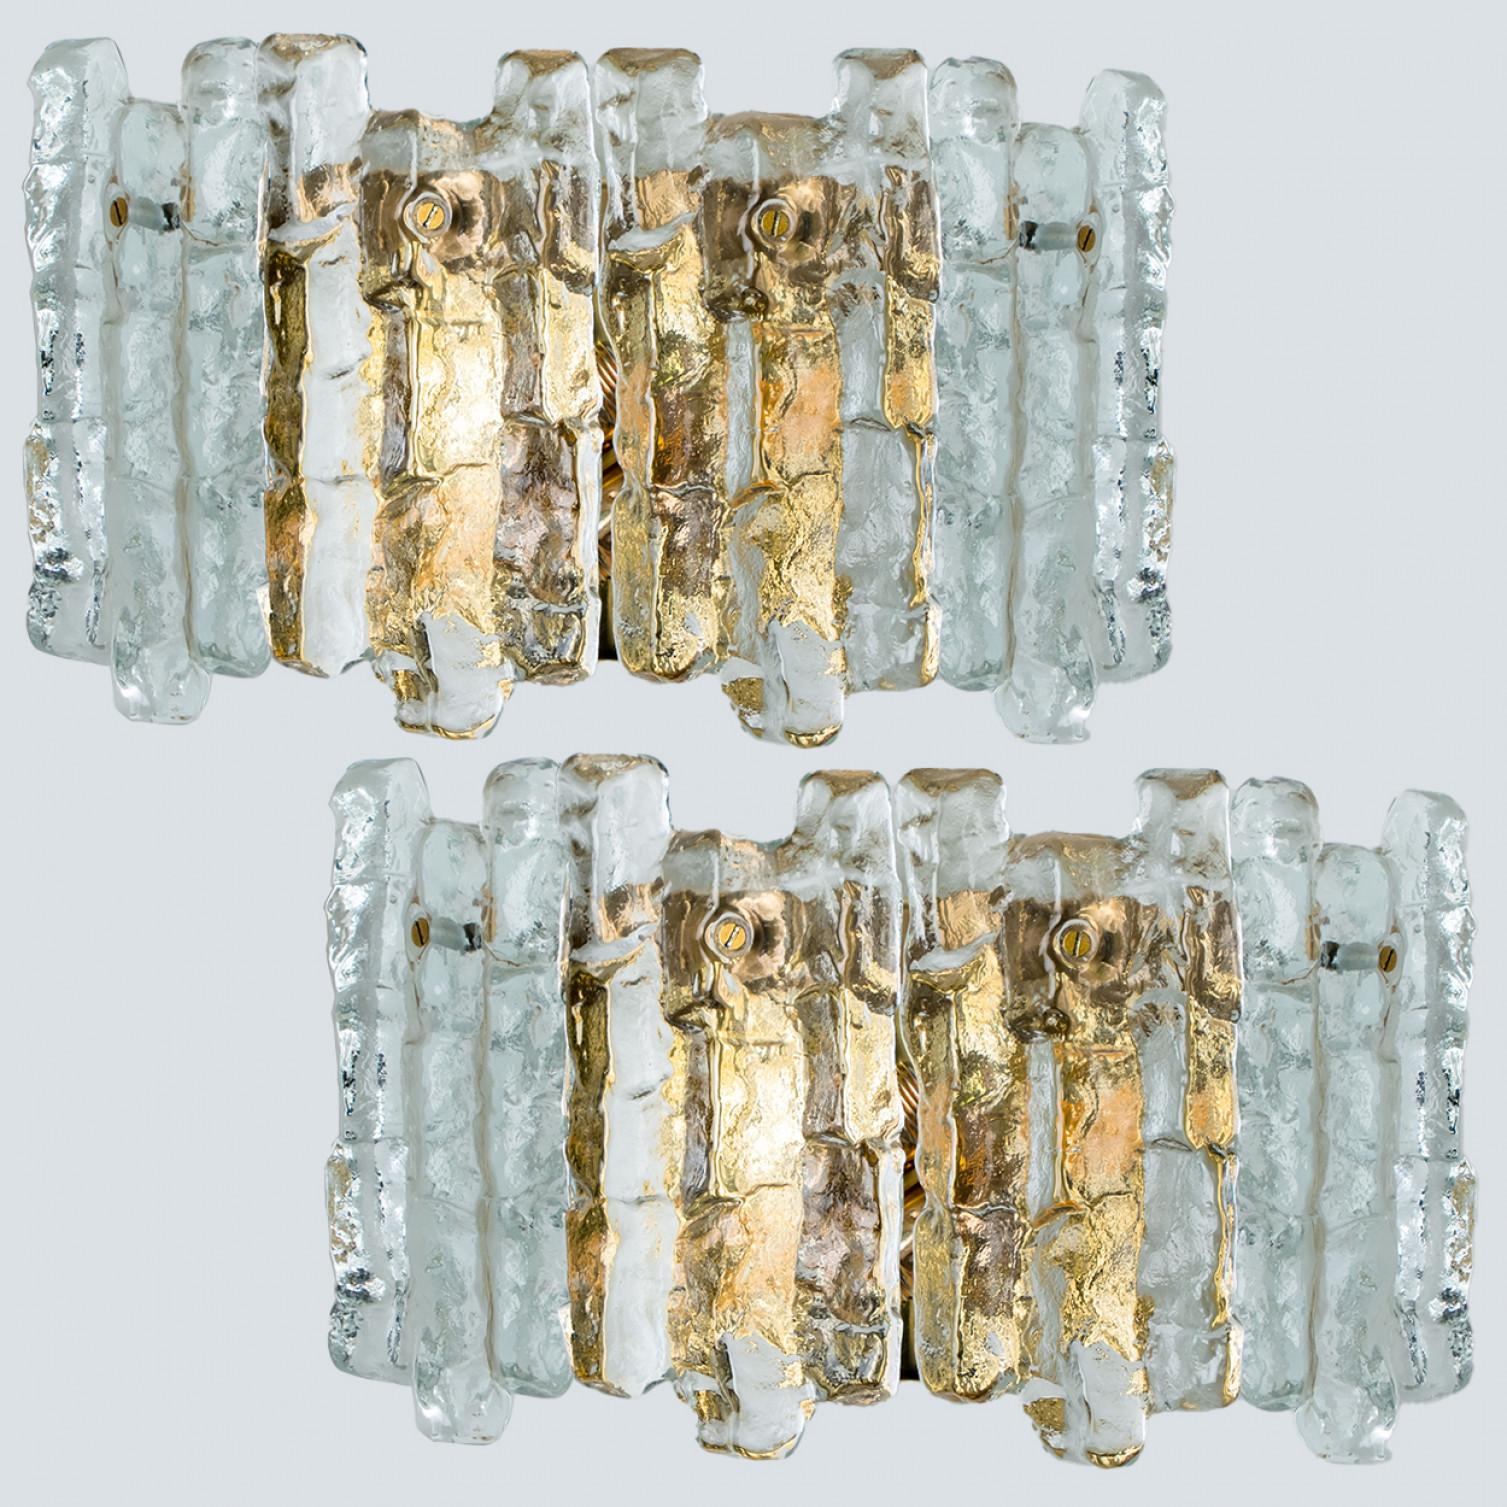 Pair of elegant modern high-end large brass wall lights or sconces, manufactured by J.T. Kalmar, Austria in the 1970s. Lovely design, executed to a very high standard. Each wall light has four solid ice glass sheets dangling on it. Clean lines to